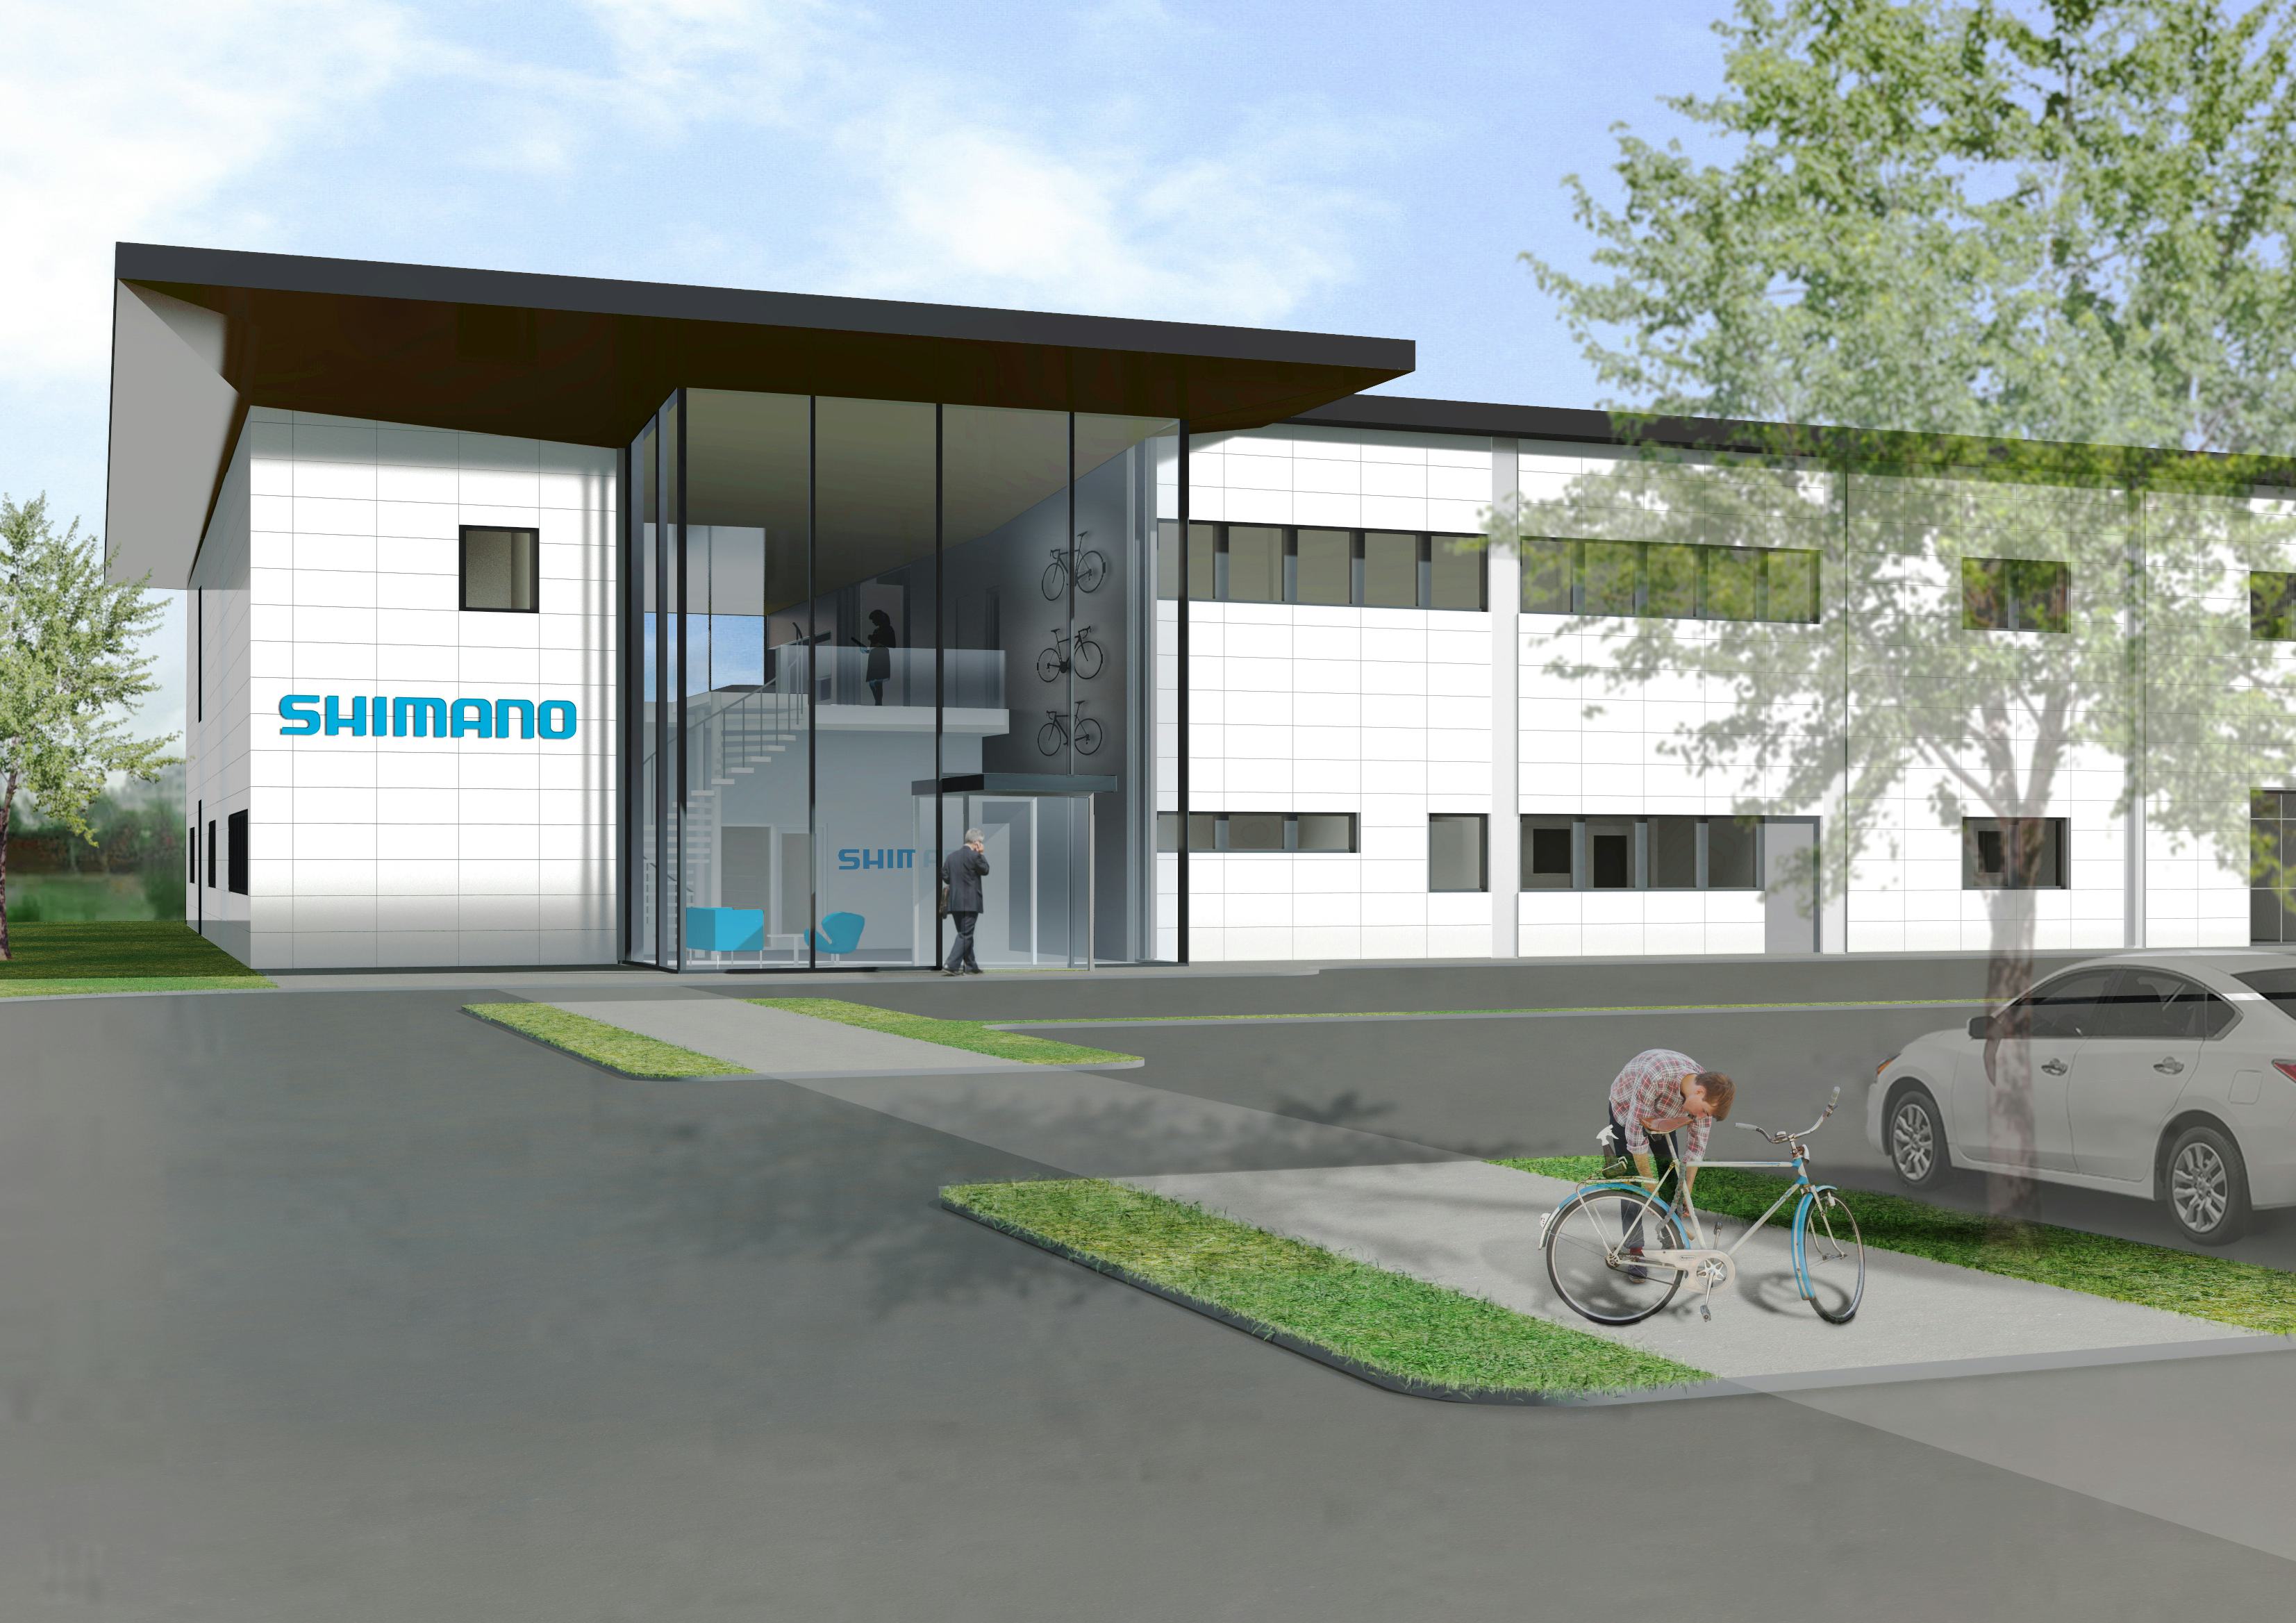 Shimano Nordic’s new office will have education facilities for both bicycle mechanics as well as marketing staff. – Photos Shimano Europe